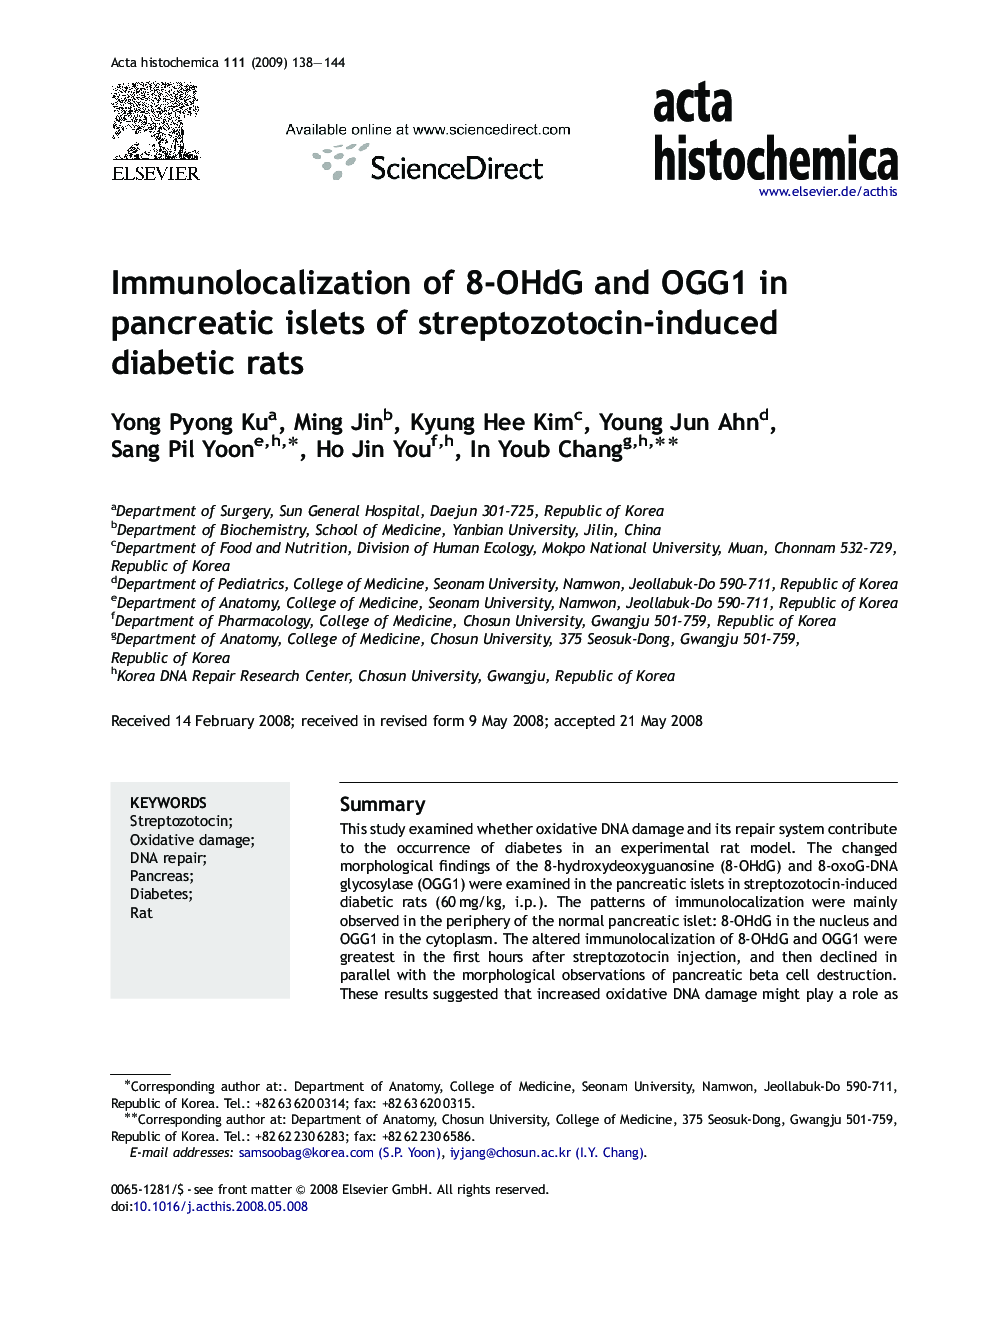 Immunolocalization of 8-OHdG and OGG1 in pancreatic islets of streptozotocin-induced diabetic rats